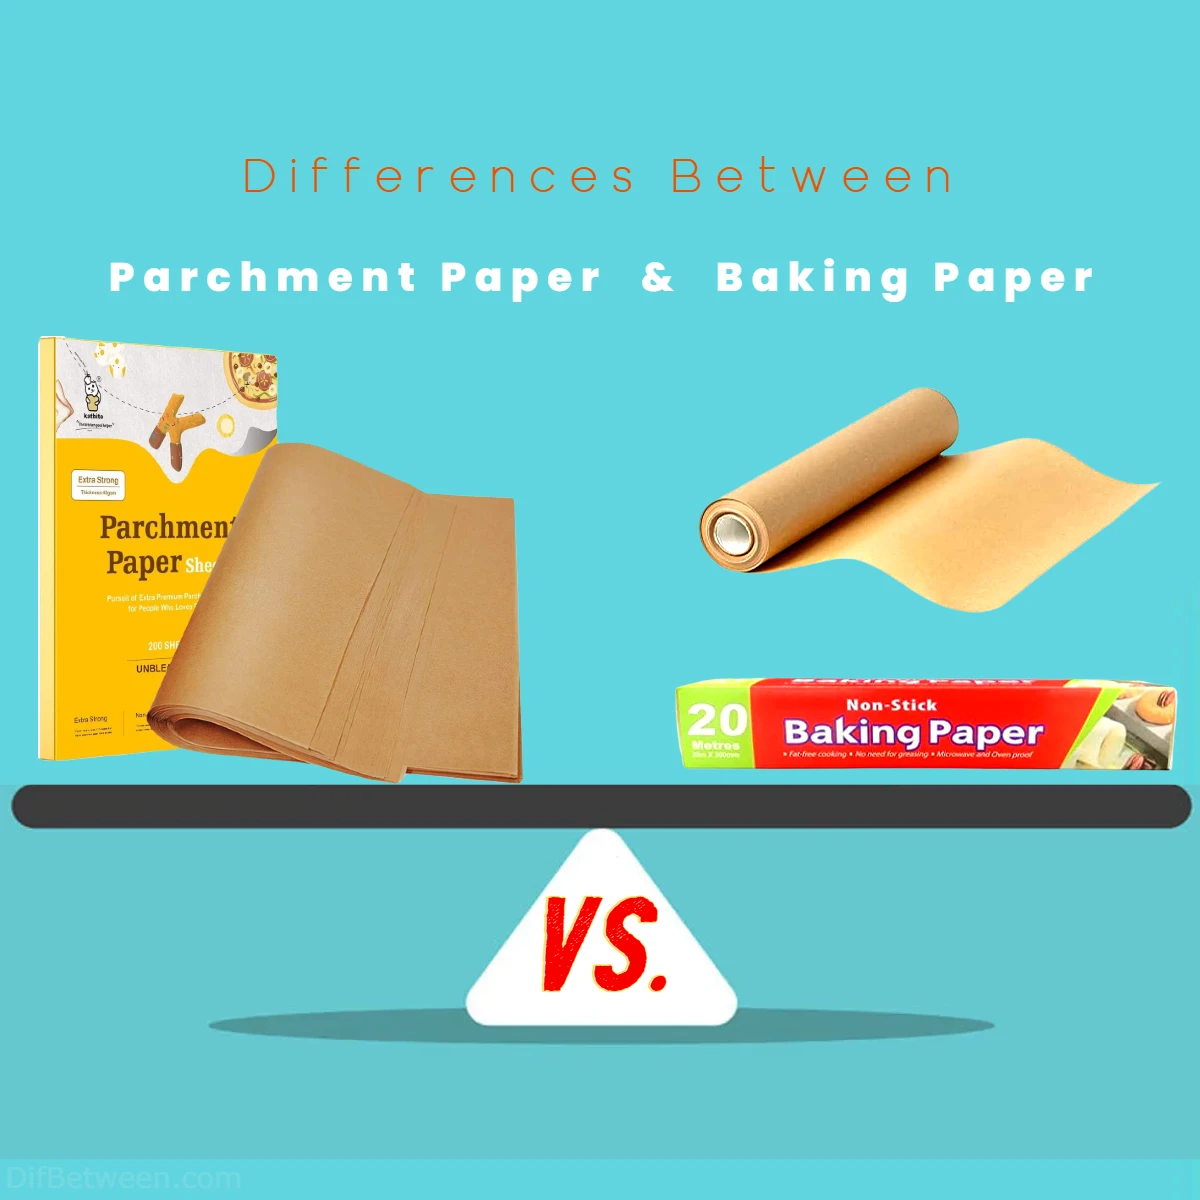 Differences Between Parchment Paper vs Baking Paper